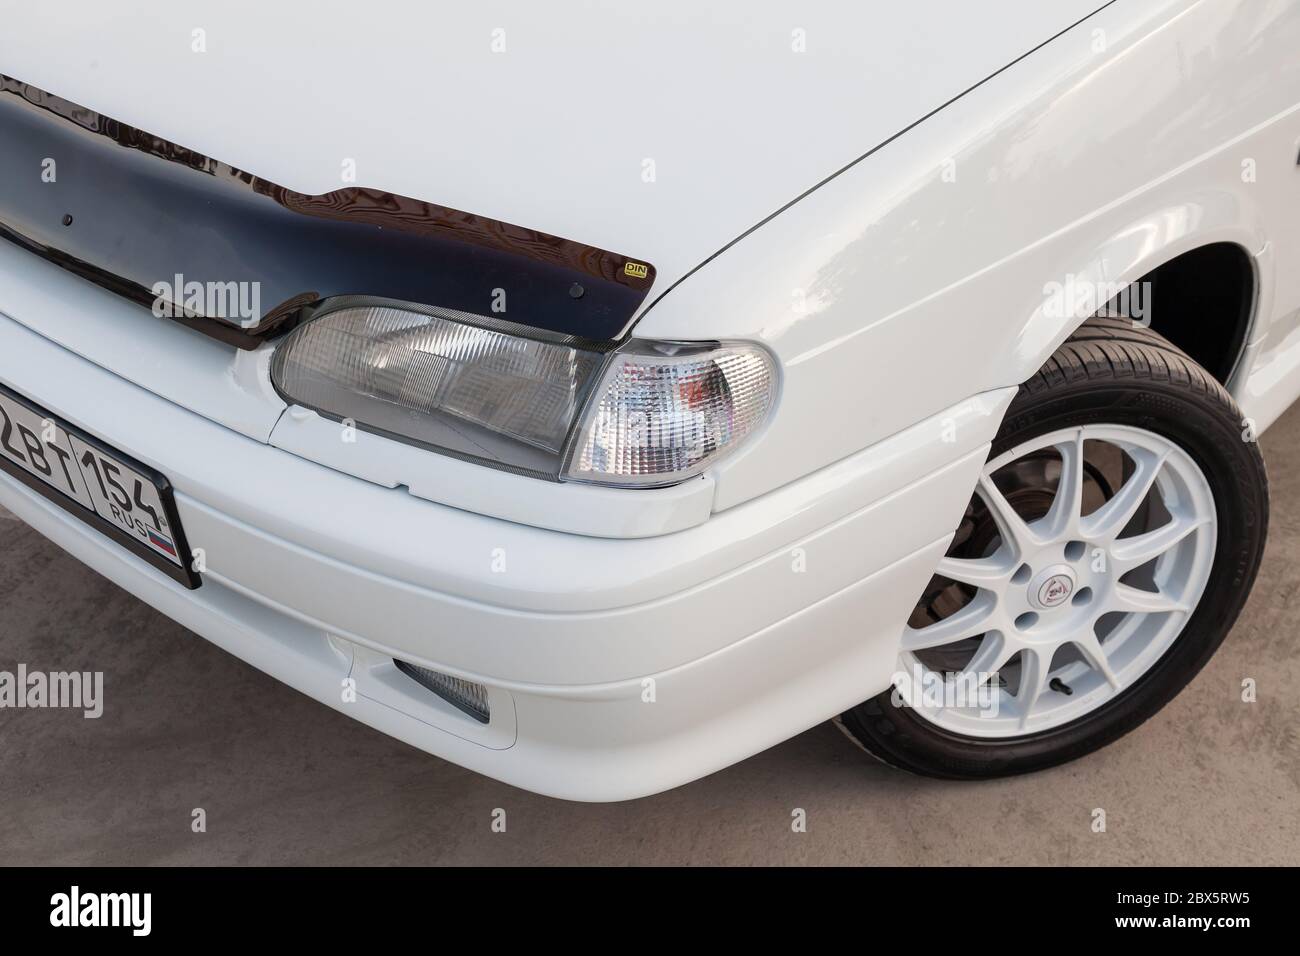 Novosibirsk, Russia - 05.20.2020: A close-up of the hood of a Lada car, wheels with a summer tire and a white disc, and a square headlamp model 2114 o Stock Photo